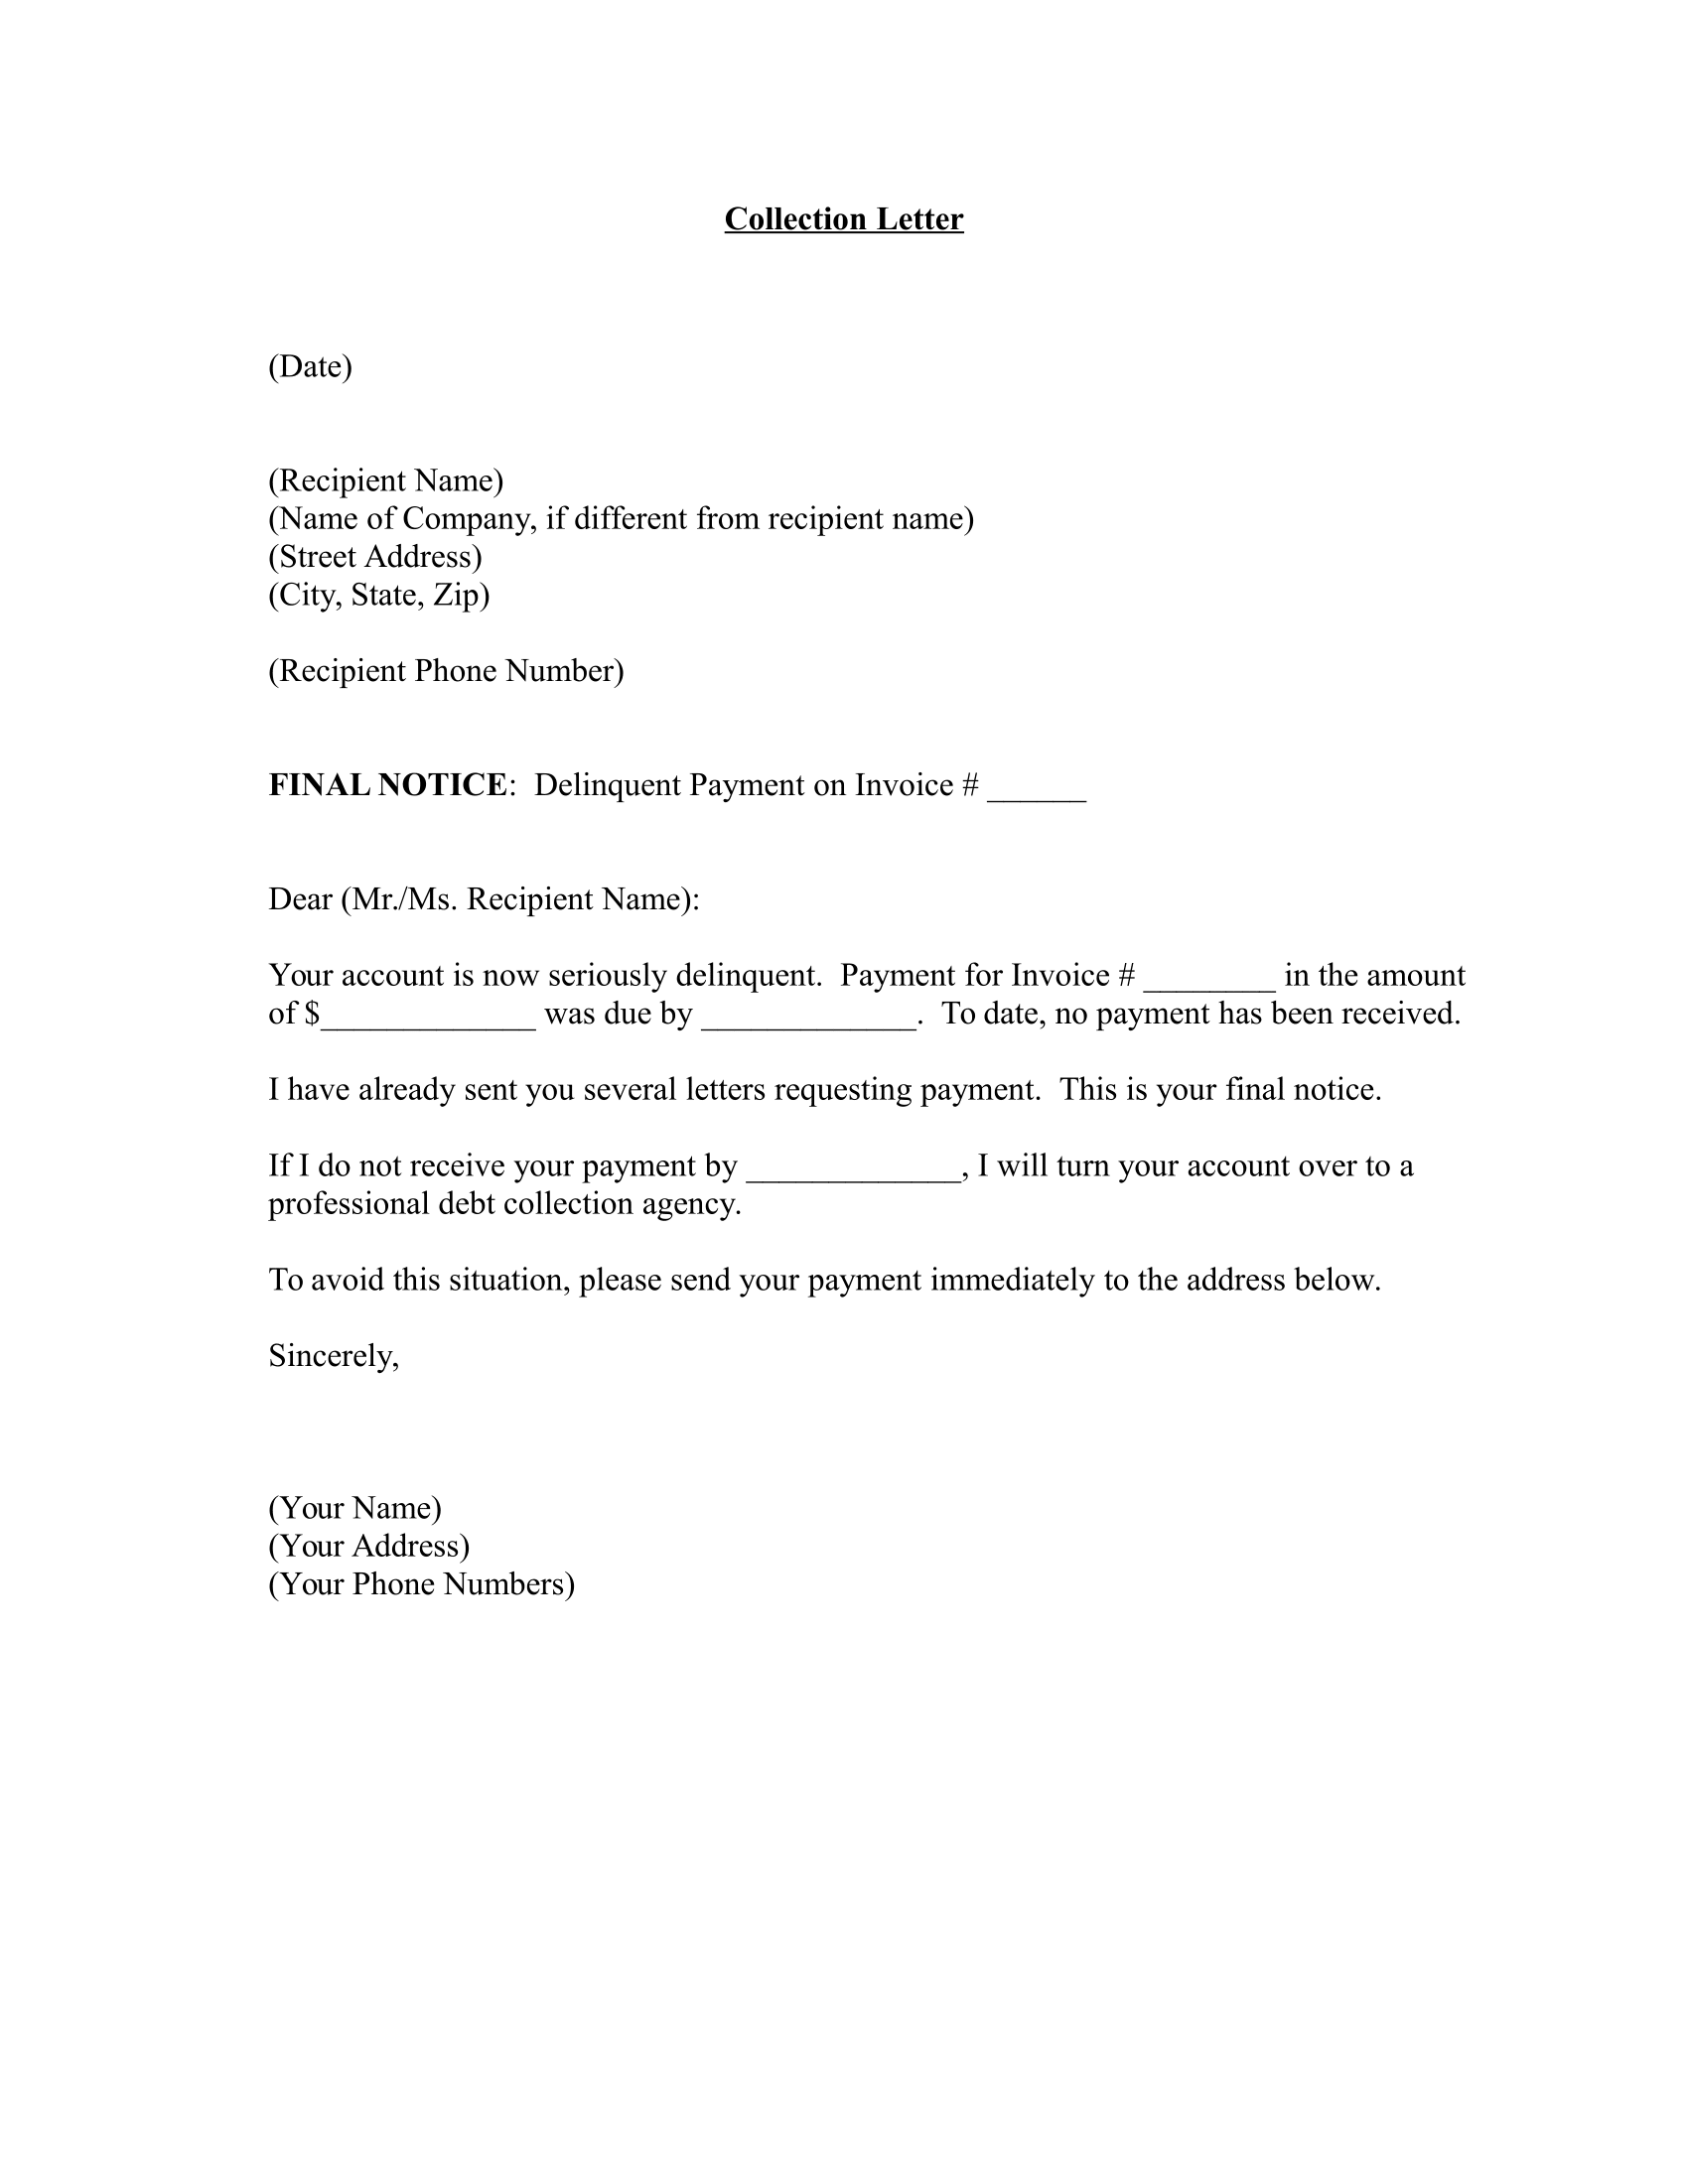 Free Collection Letter Template from officewriting.com